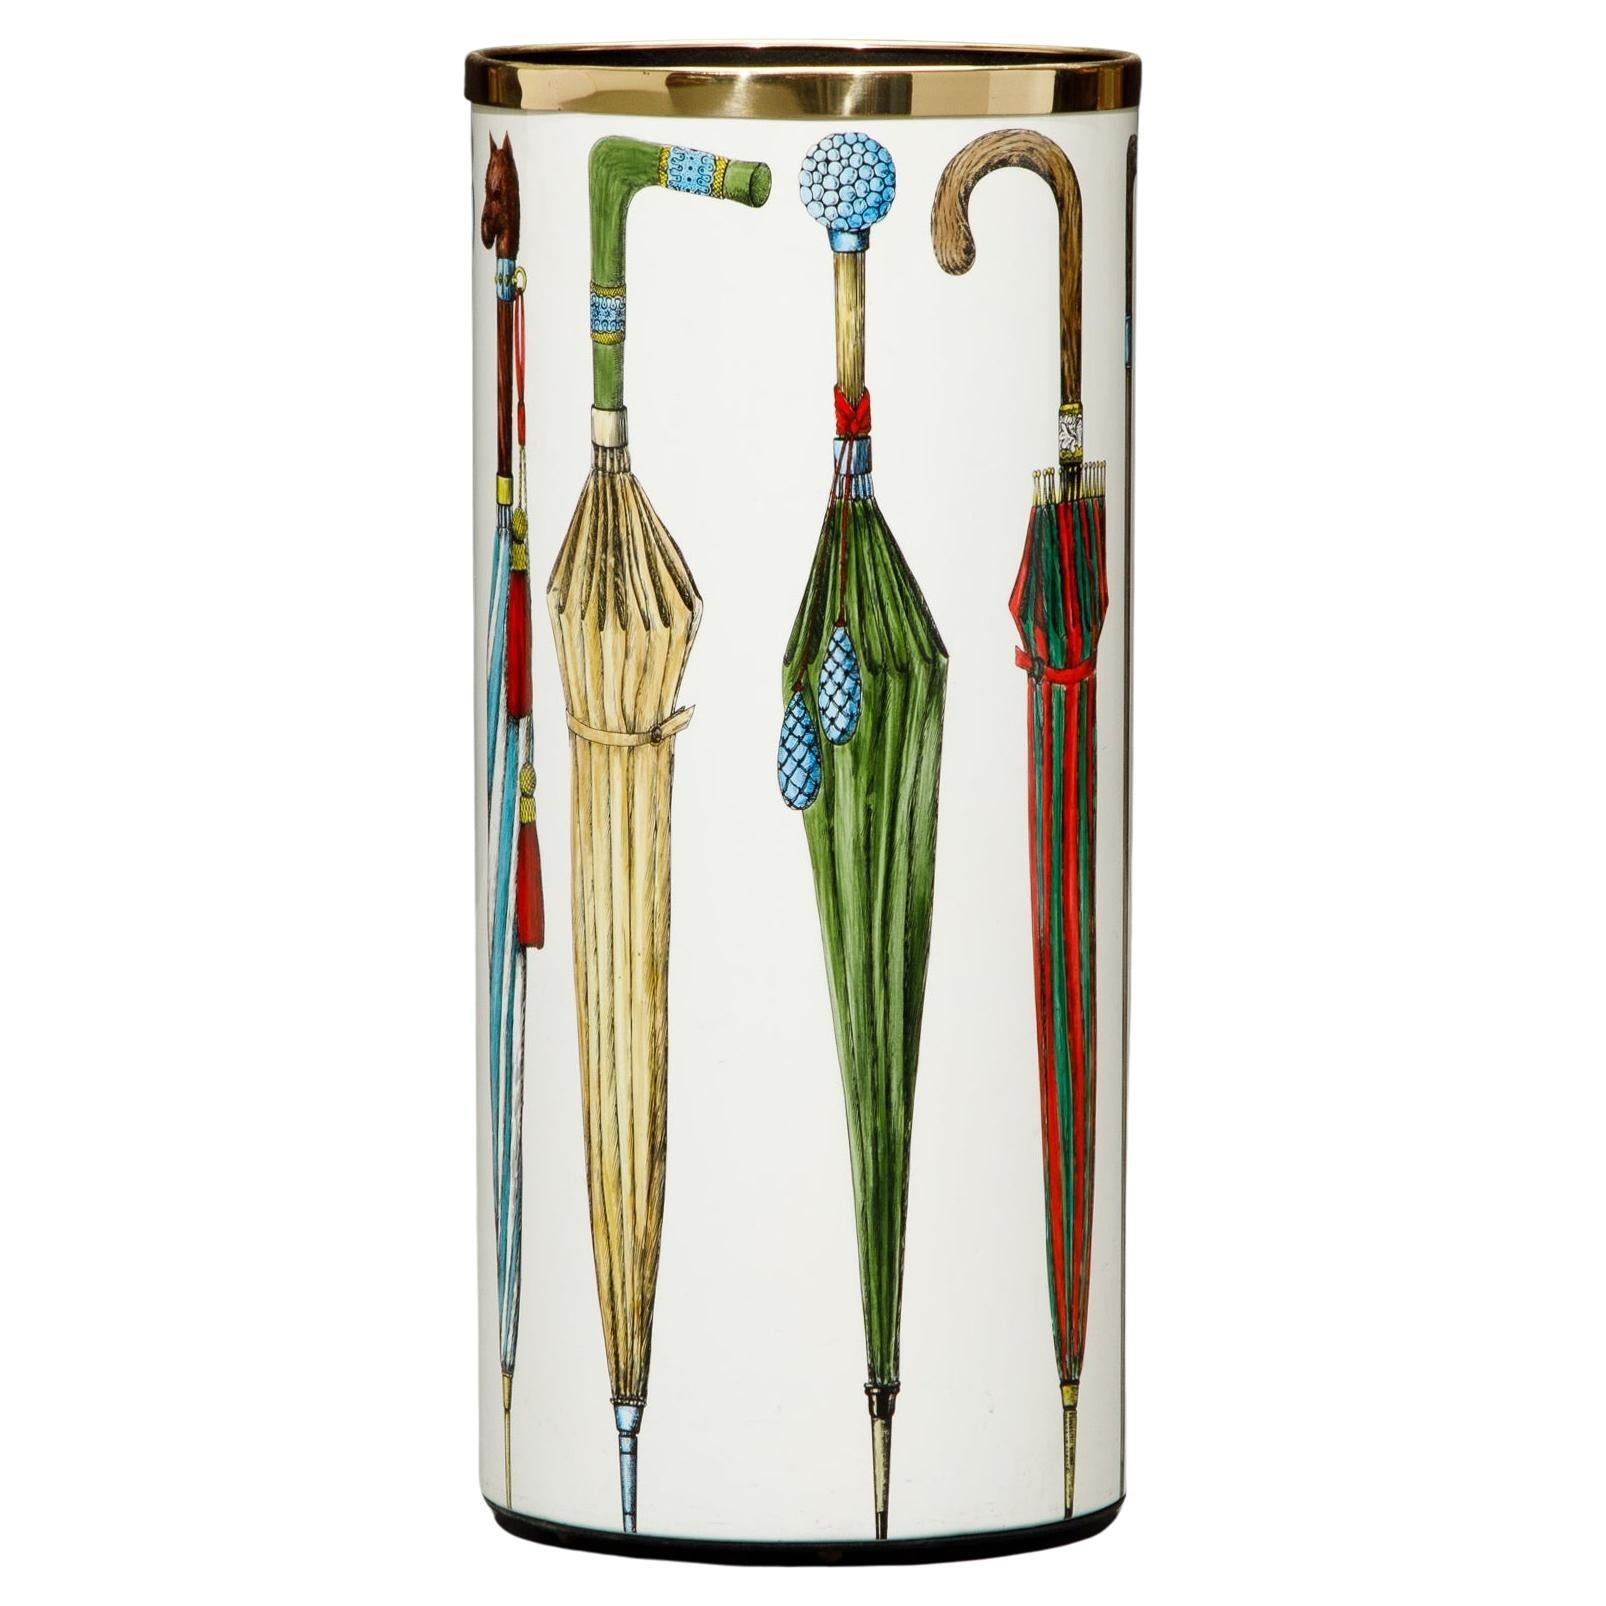 Umbrella Stand by Piero Fornasetti, Italy, Signed 